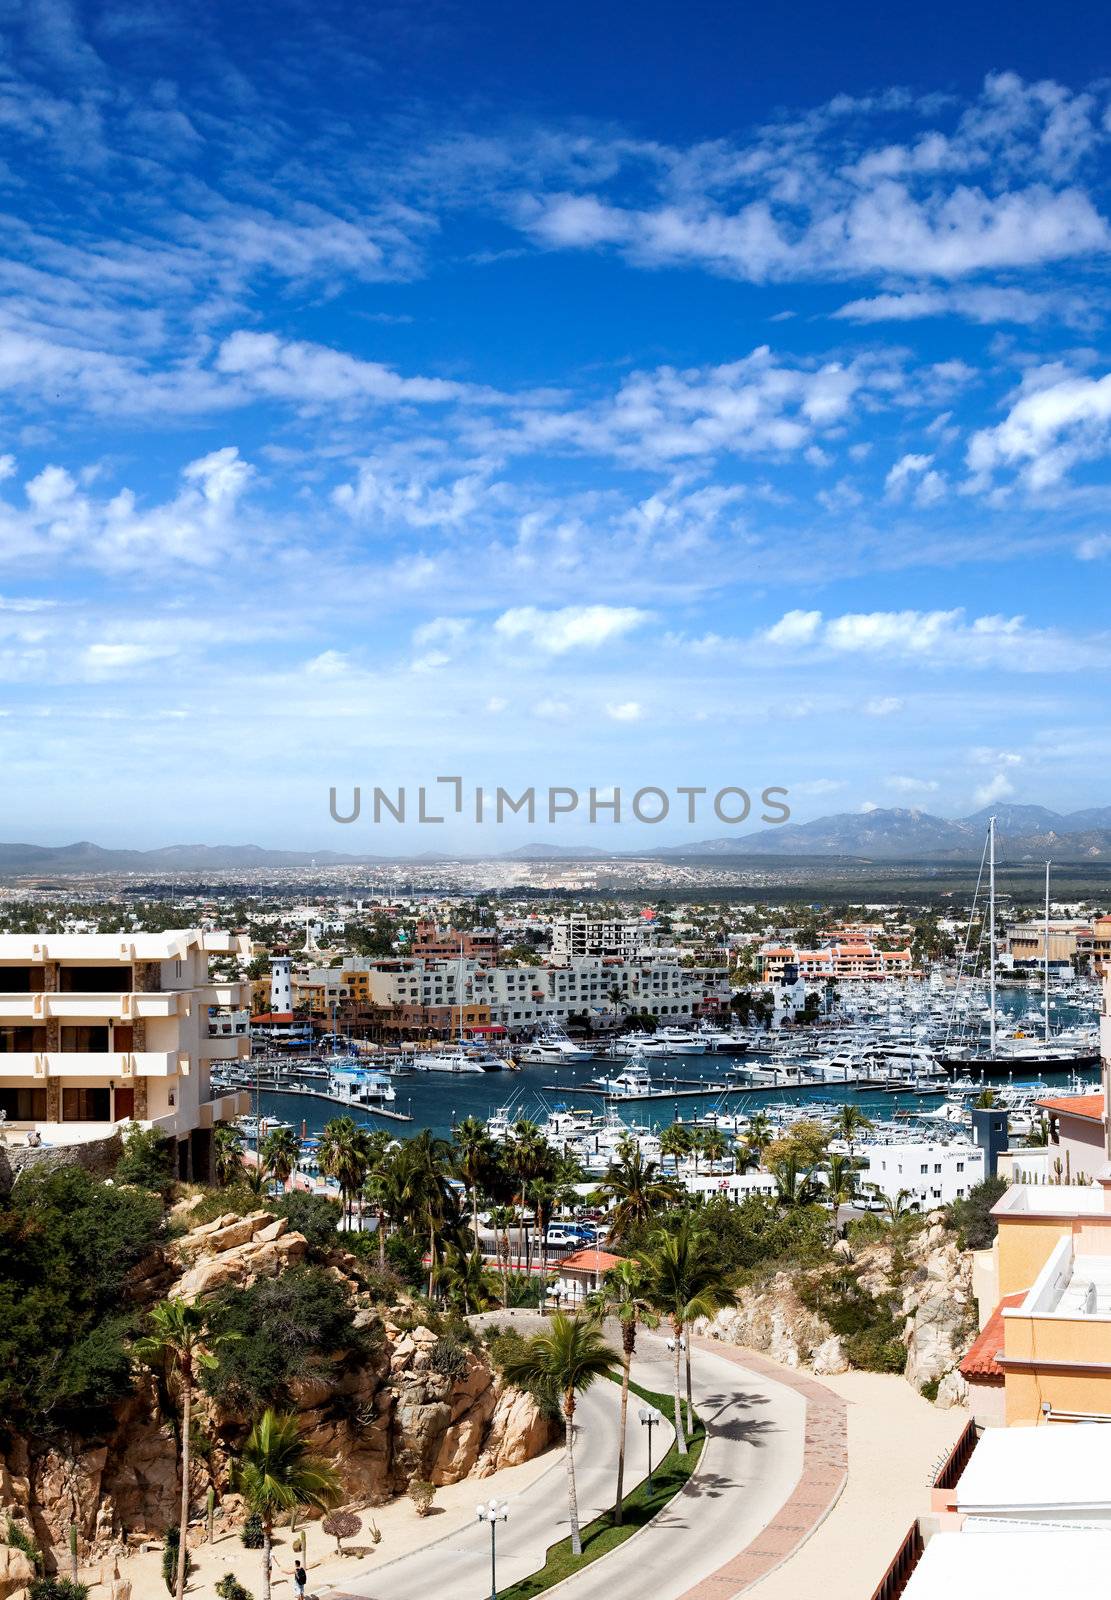 Marina and downtown Cabo San Lucas by gary718